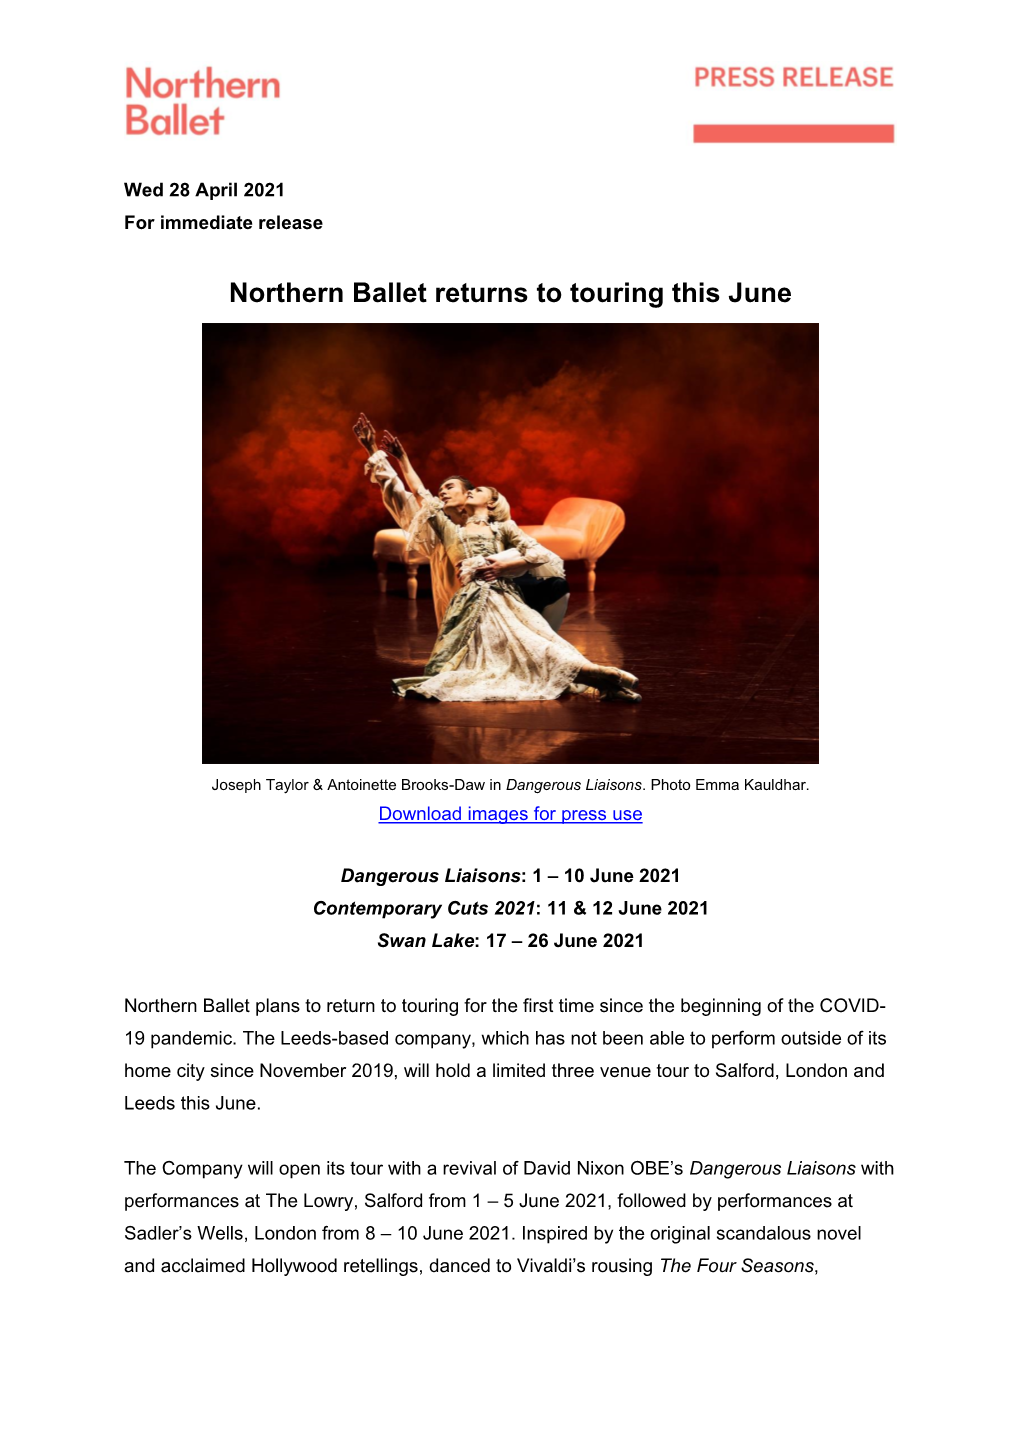 Northern Ballet Returns to Touring This June